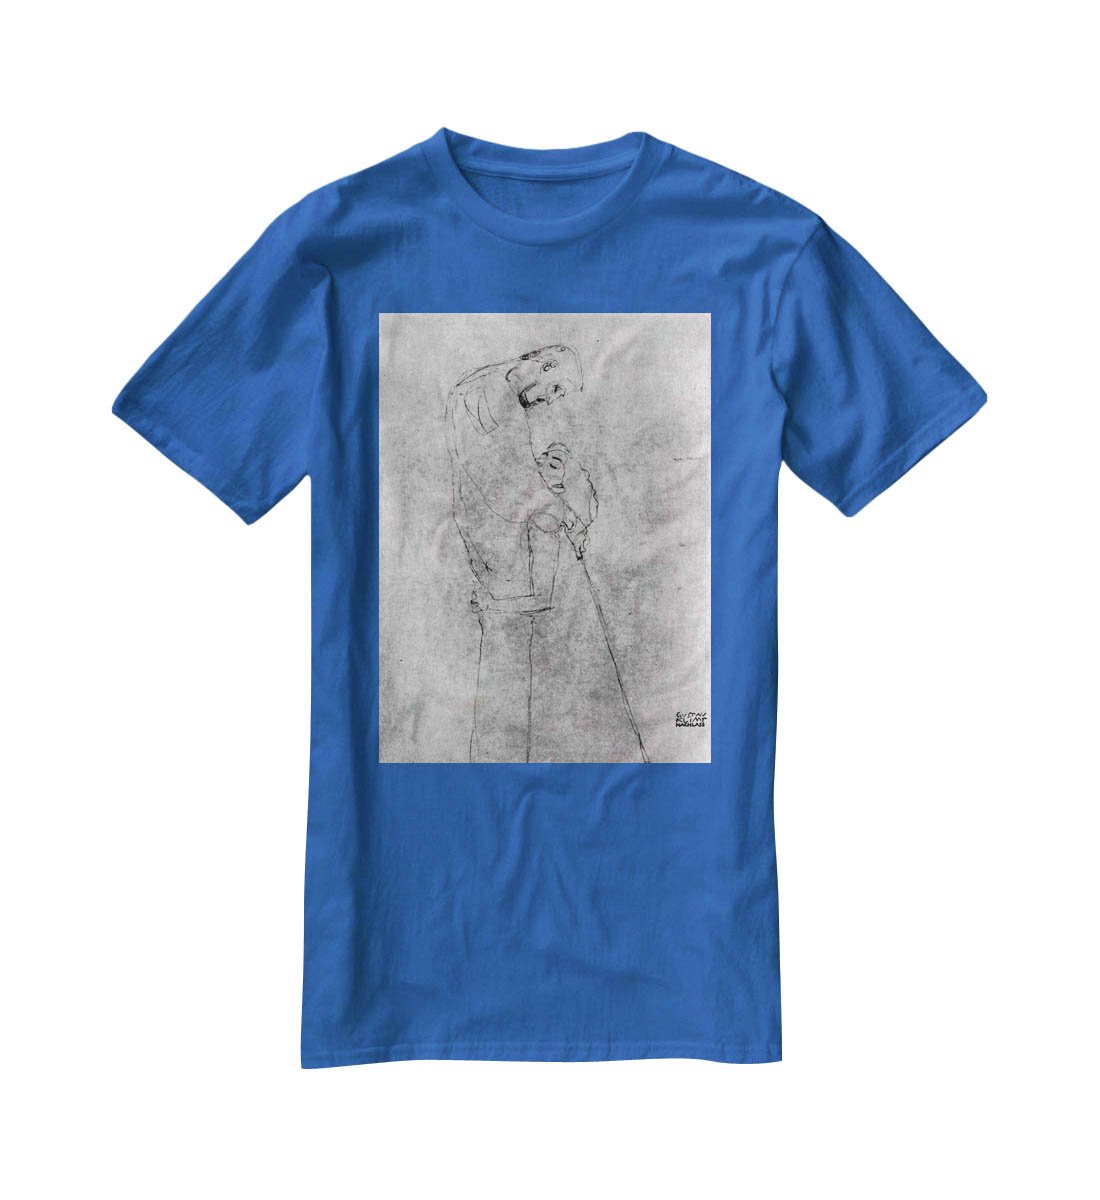 Woman and man standing in profile by Klimt T-Shirt - Canvas Art Rocks - 2